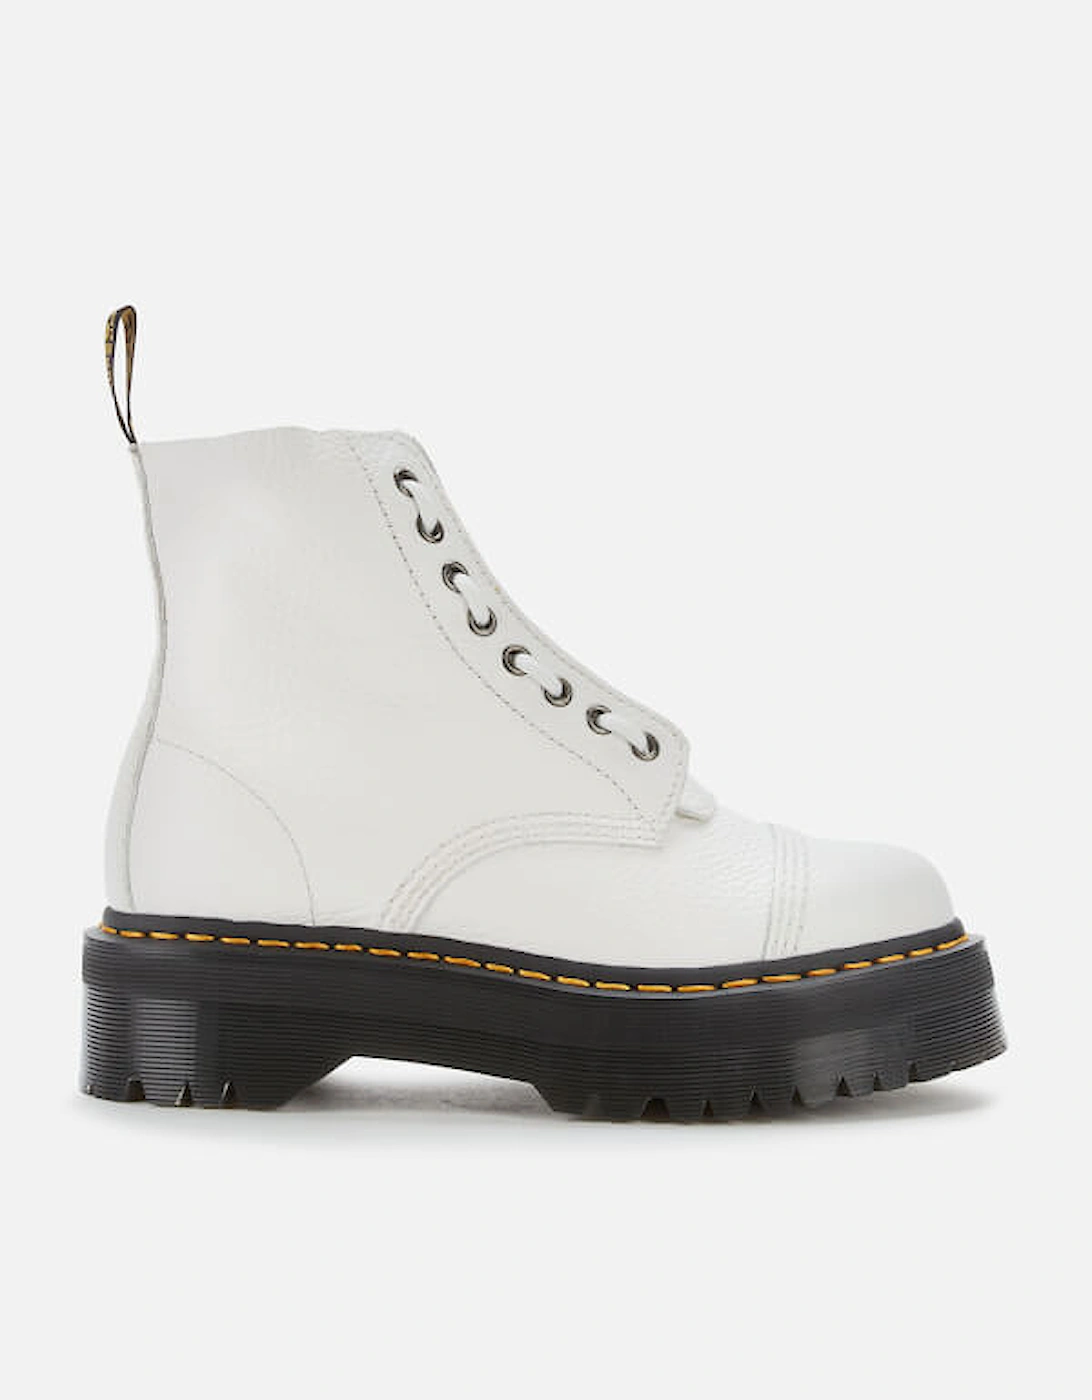 Dr. Martens Women's Sinclair Leather Zip Front Boots - White - Dr. Martens - Home - Designer Brands A-Z - Dr. Martens - Dr. Martens Women's Sinclair Leather Zip Front Boots - White, 3 of 2